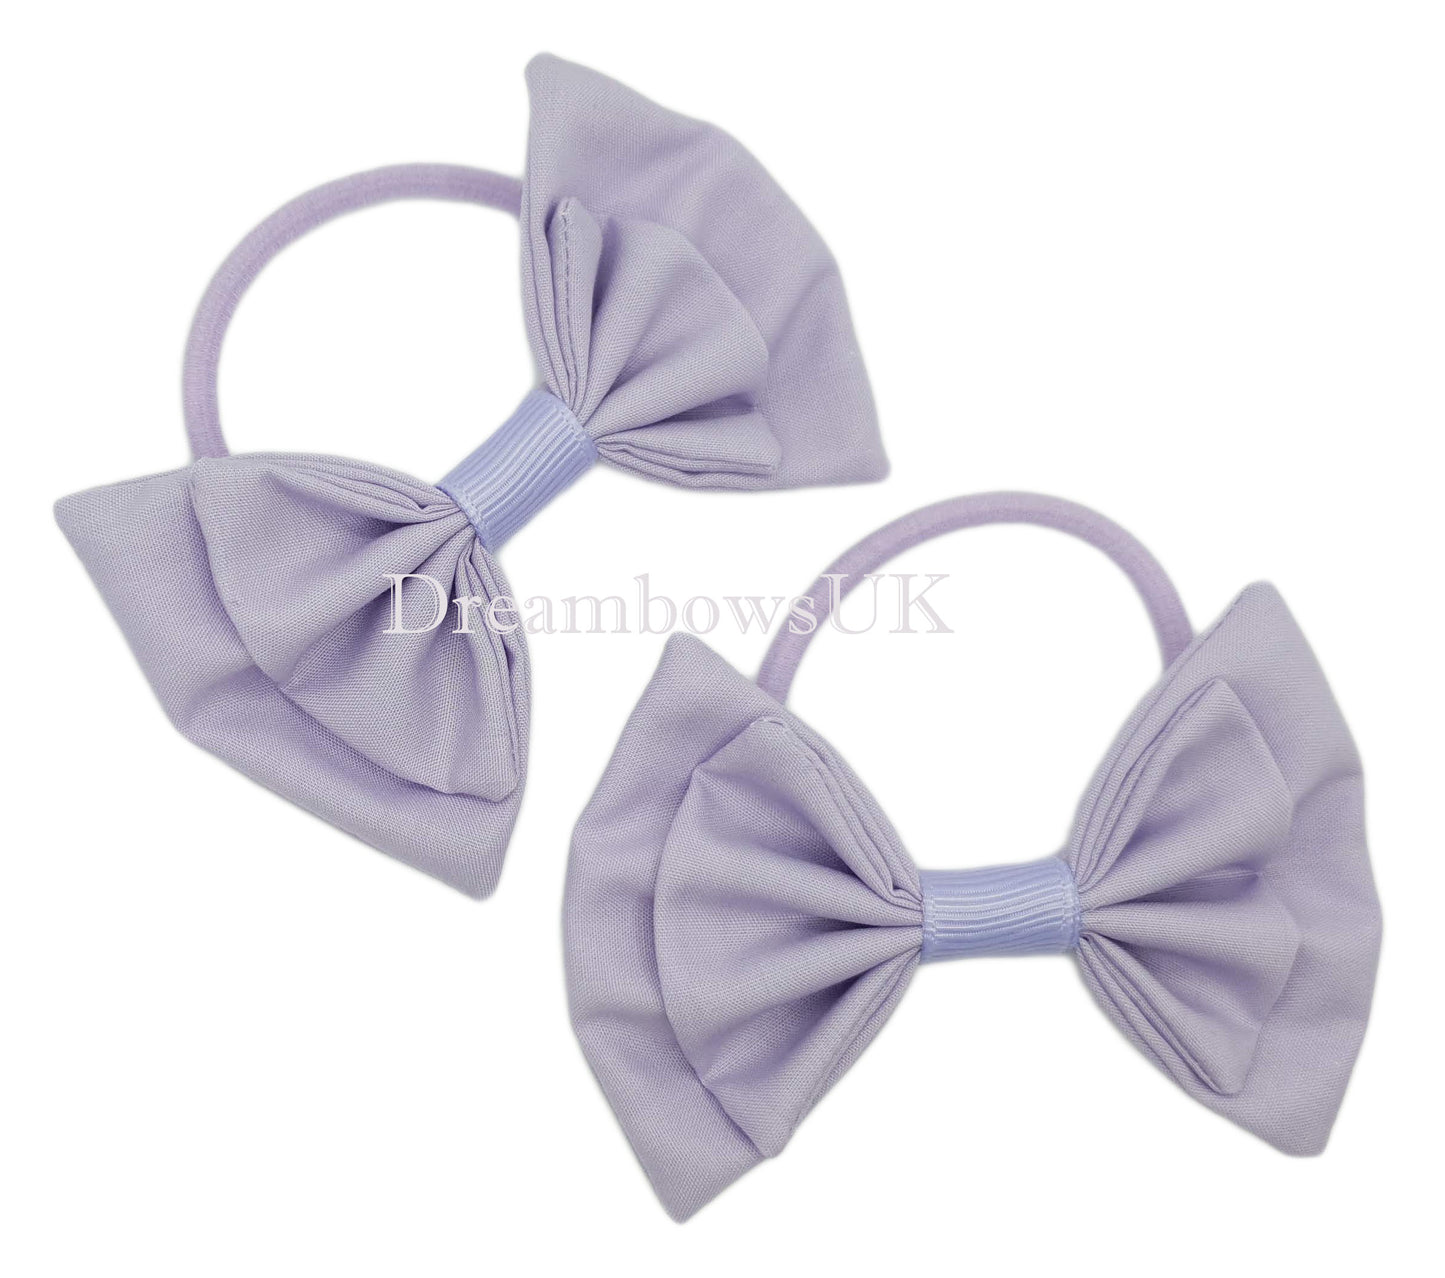 Lilac cotton fabric hair bows on thick hair bobbles